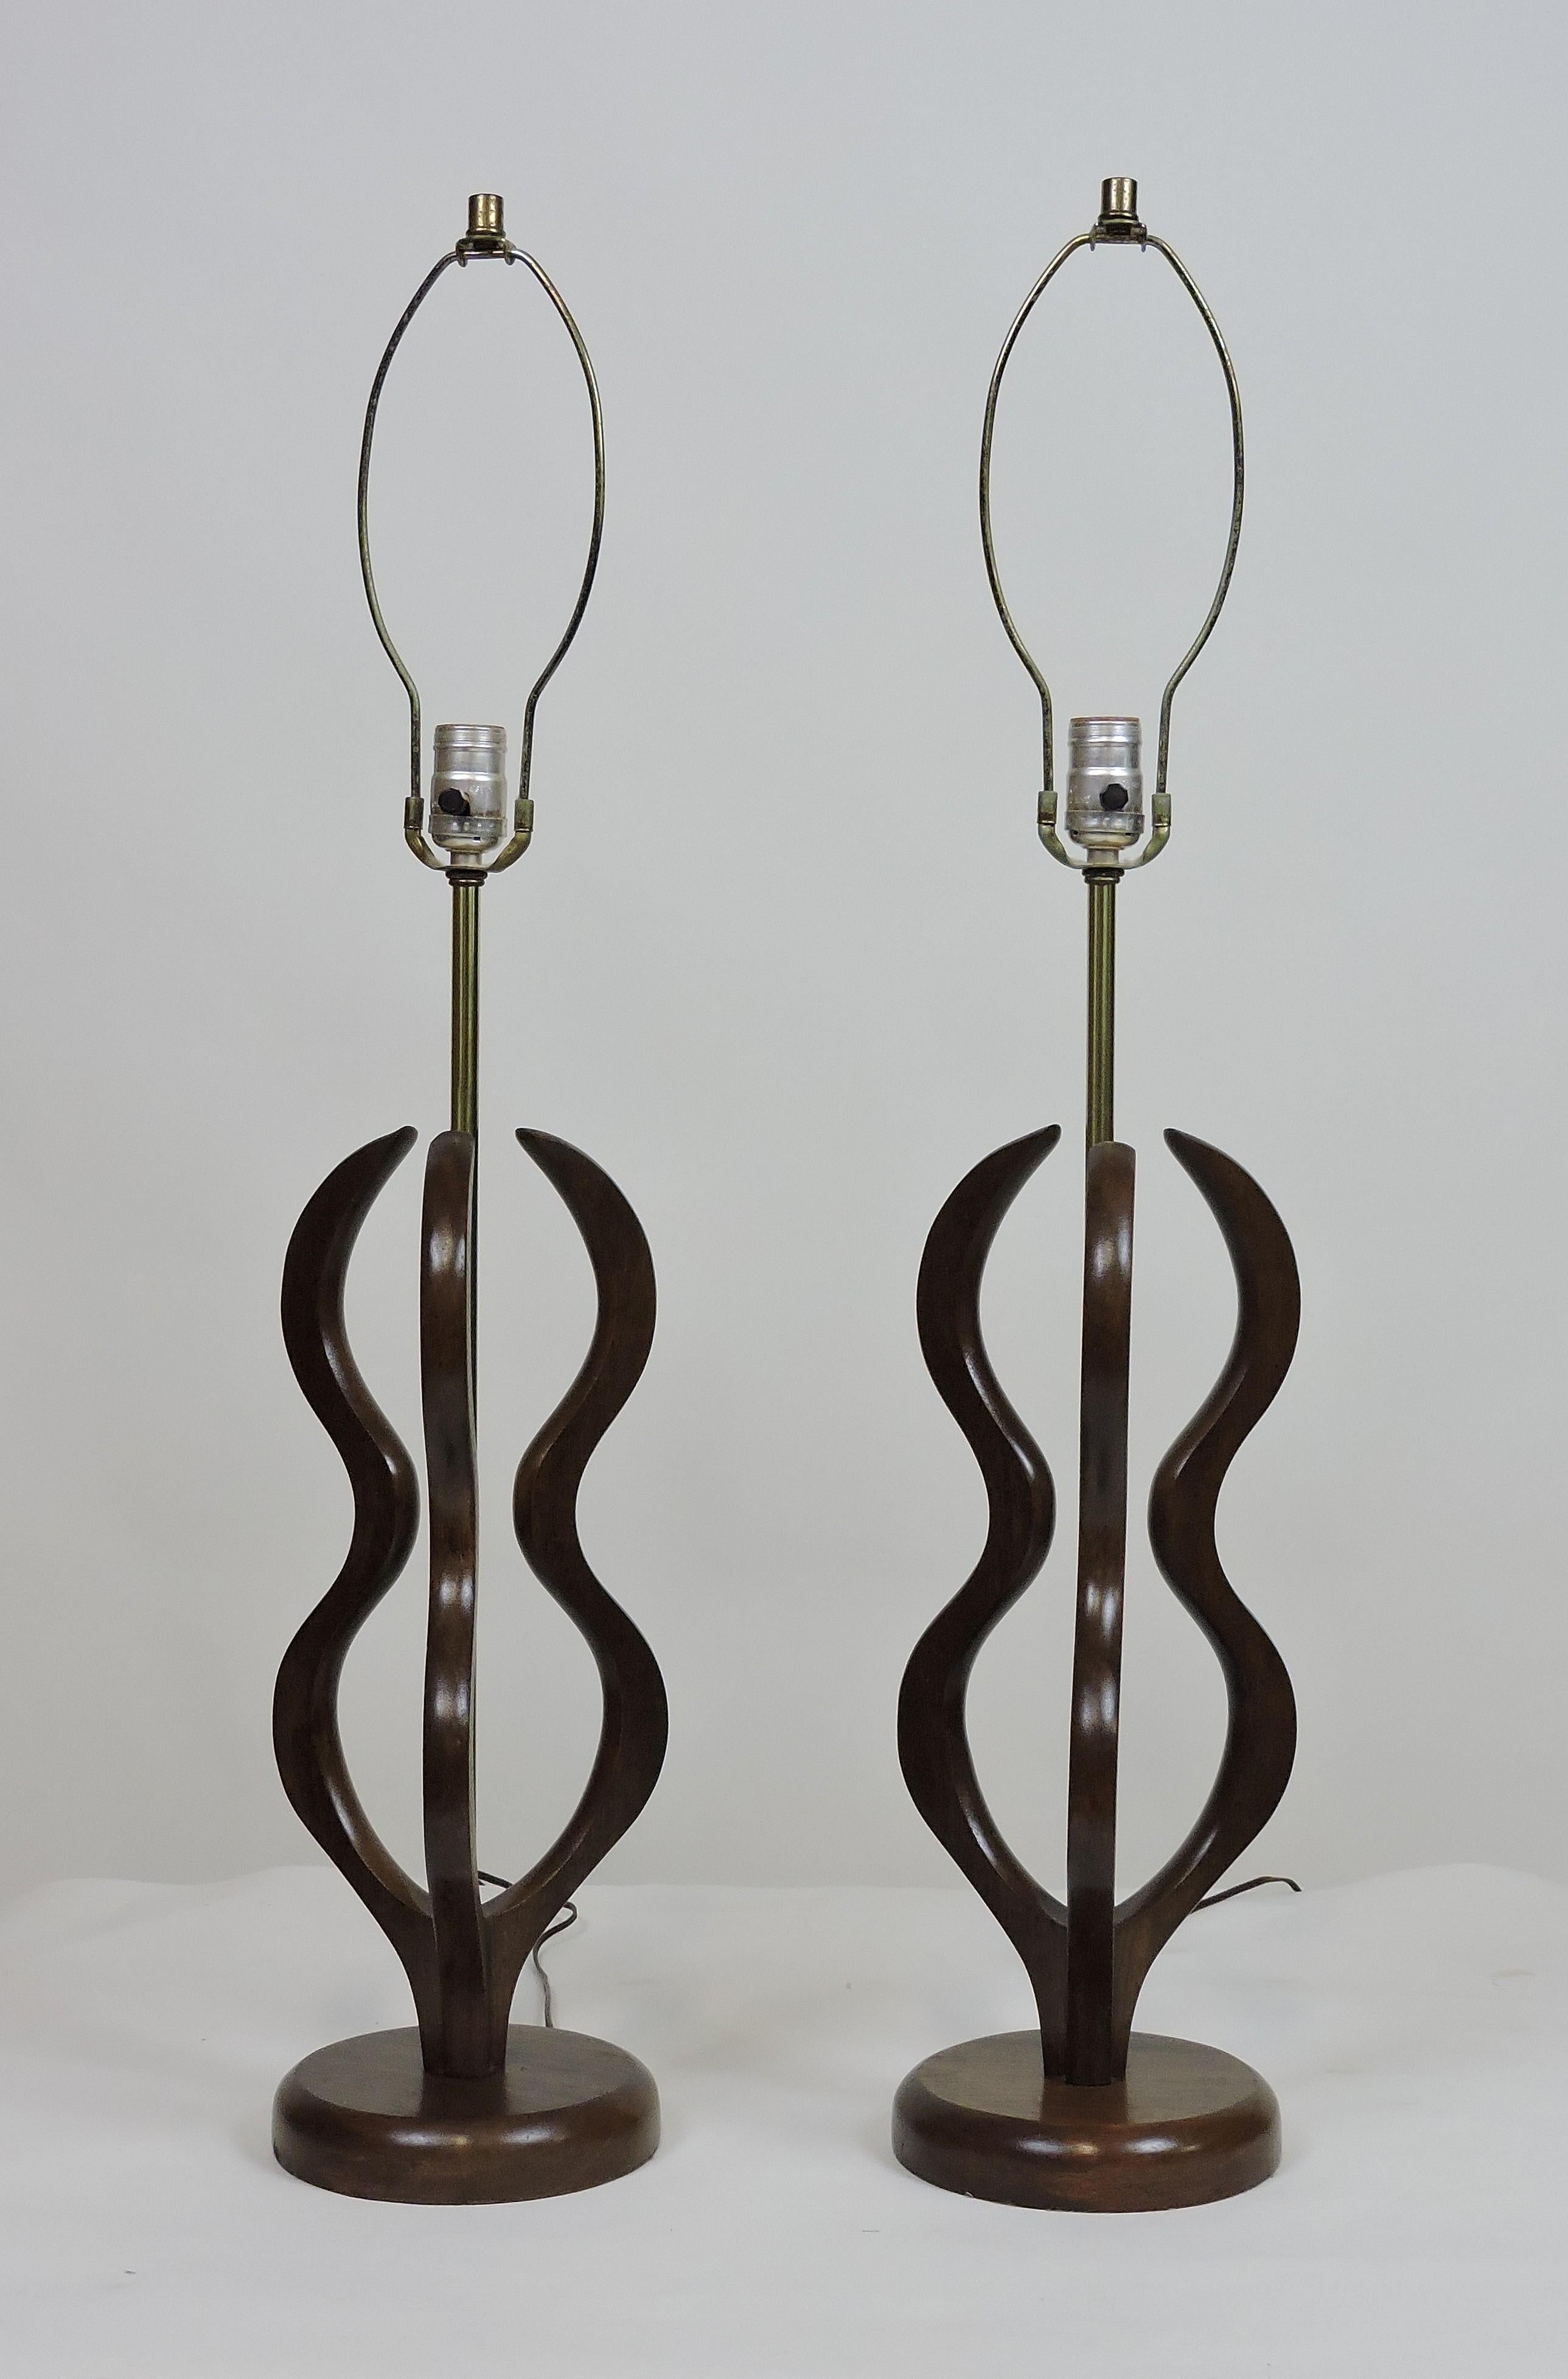 Pair of large sized midcentury Pearsall or Modeline style table lamps. These lamps are made of wavy formed sculpted walnut and have the original nubby fabric shades.